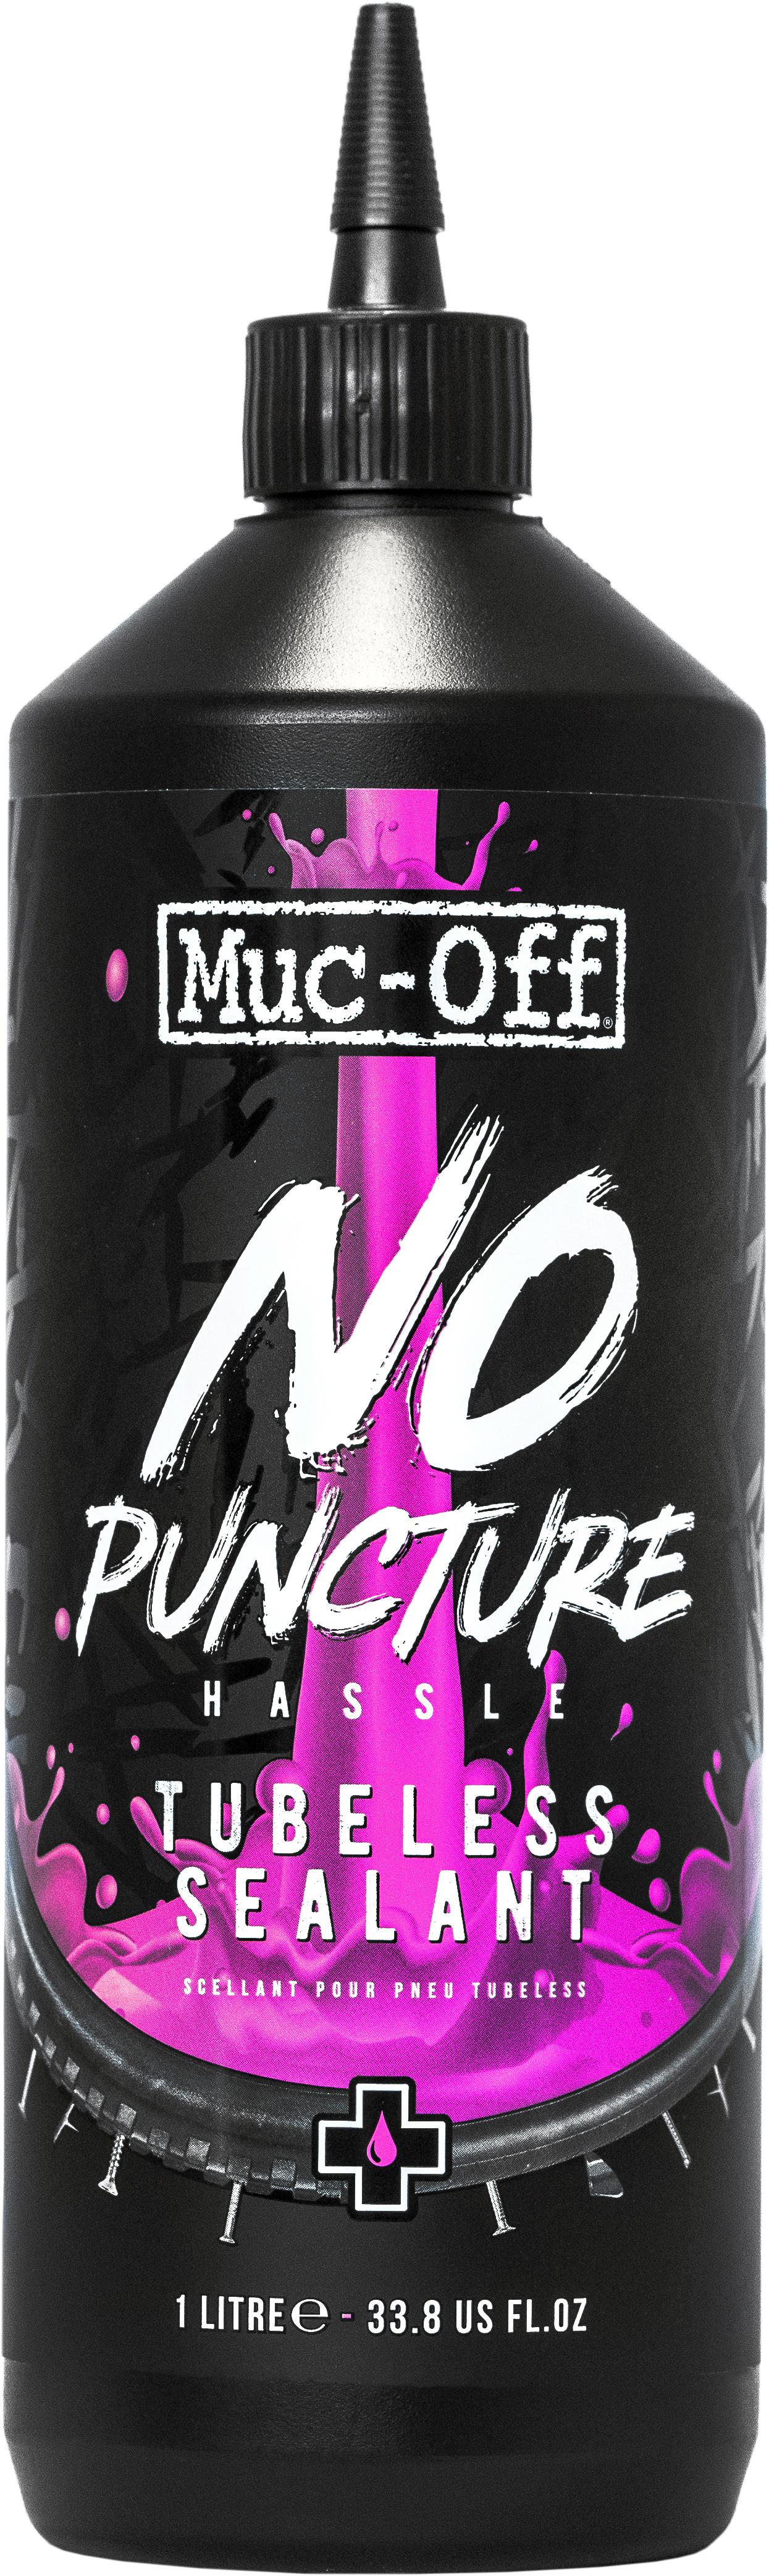 Muc-Off No Puncture Hassle Tyre Sealant (1L) Chain Reaction